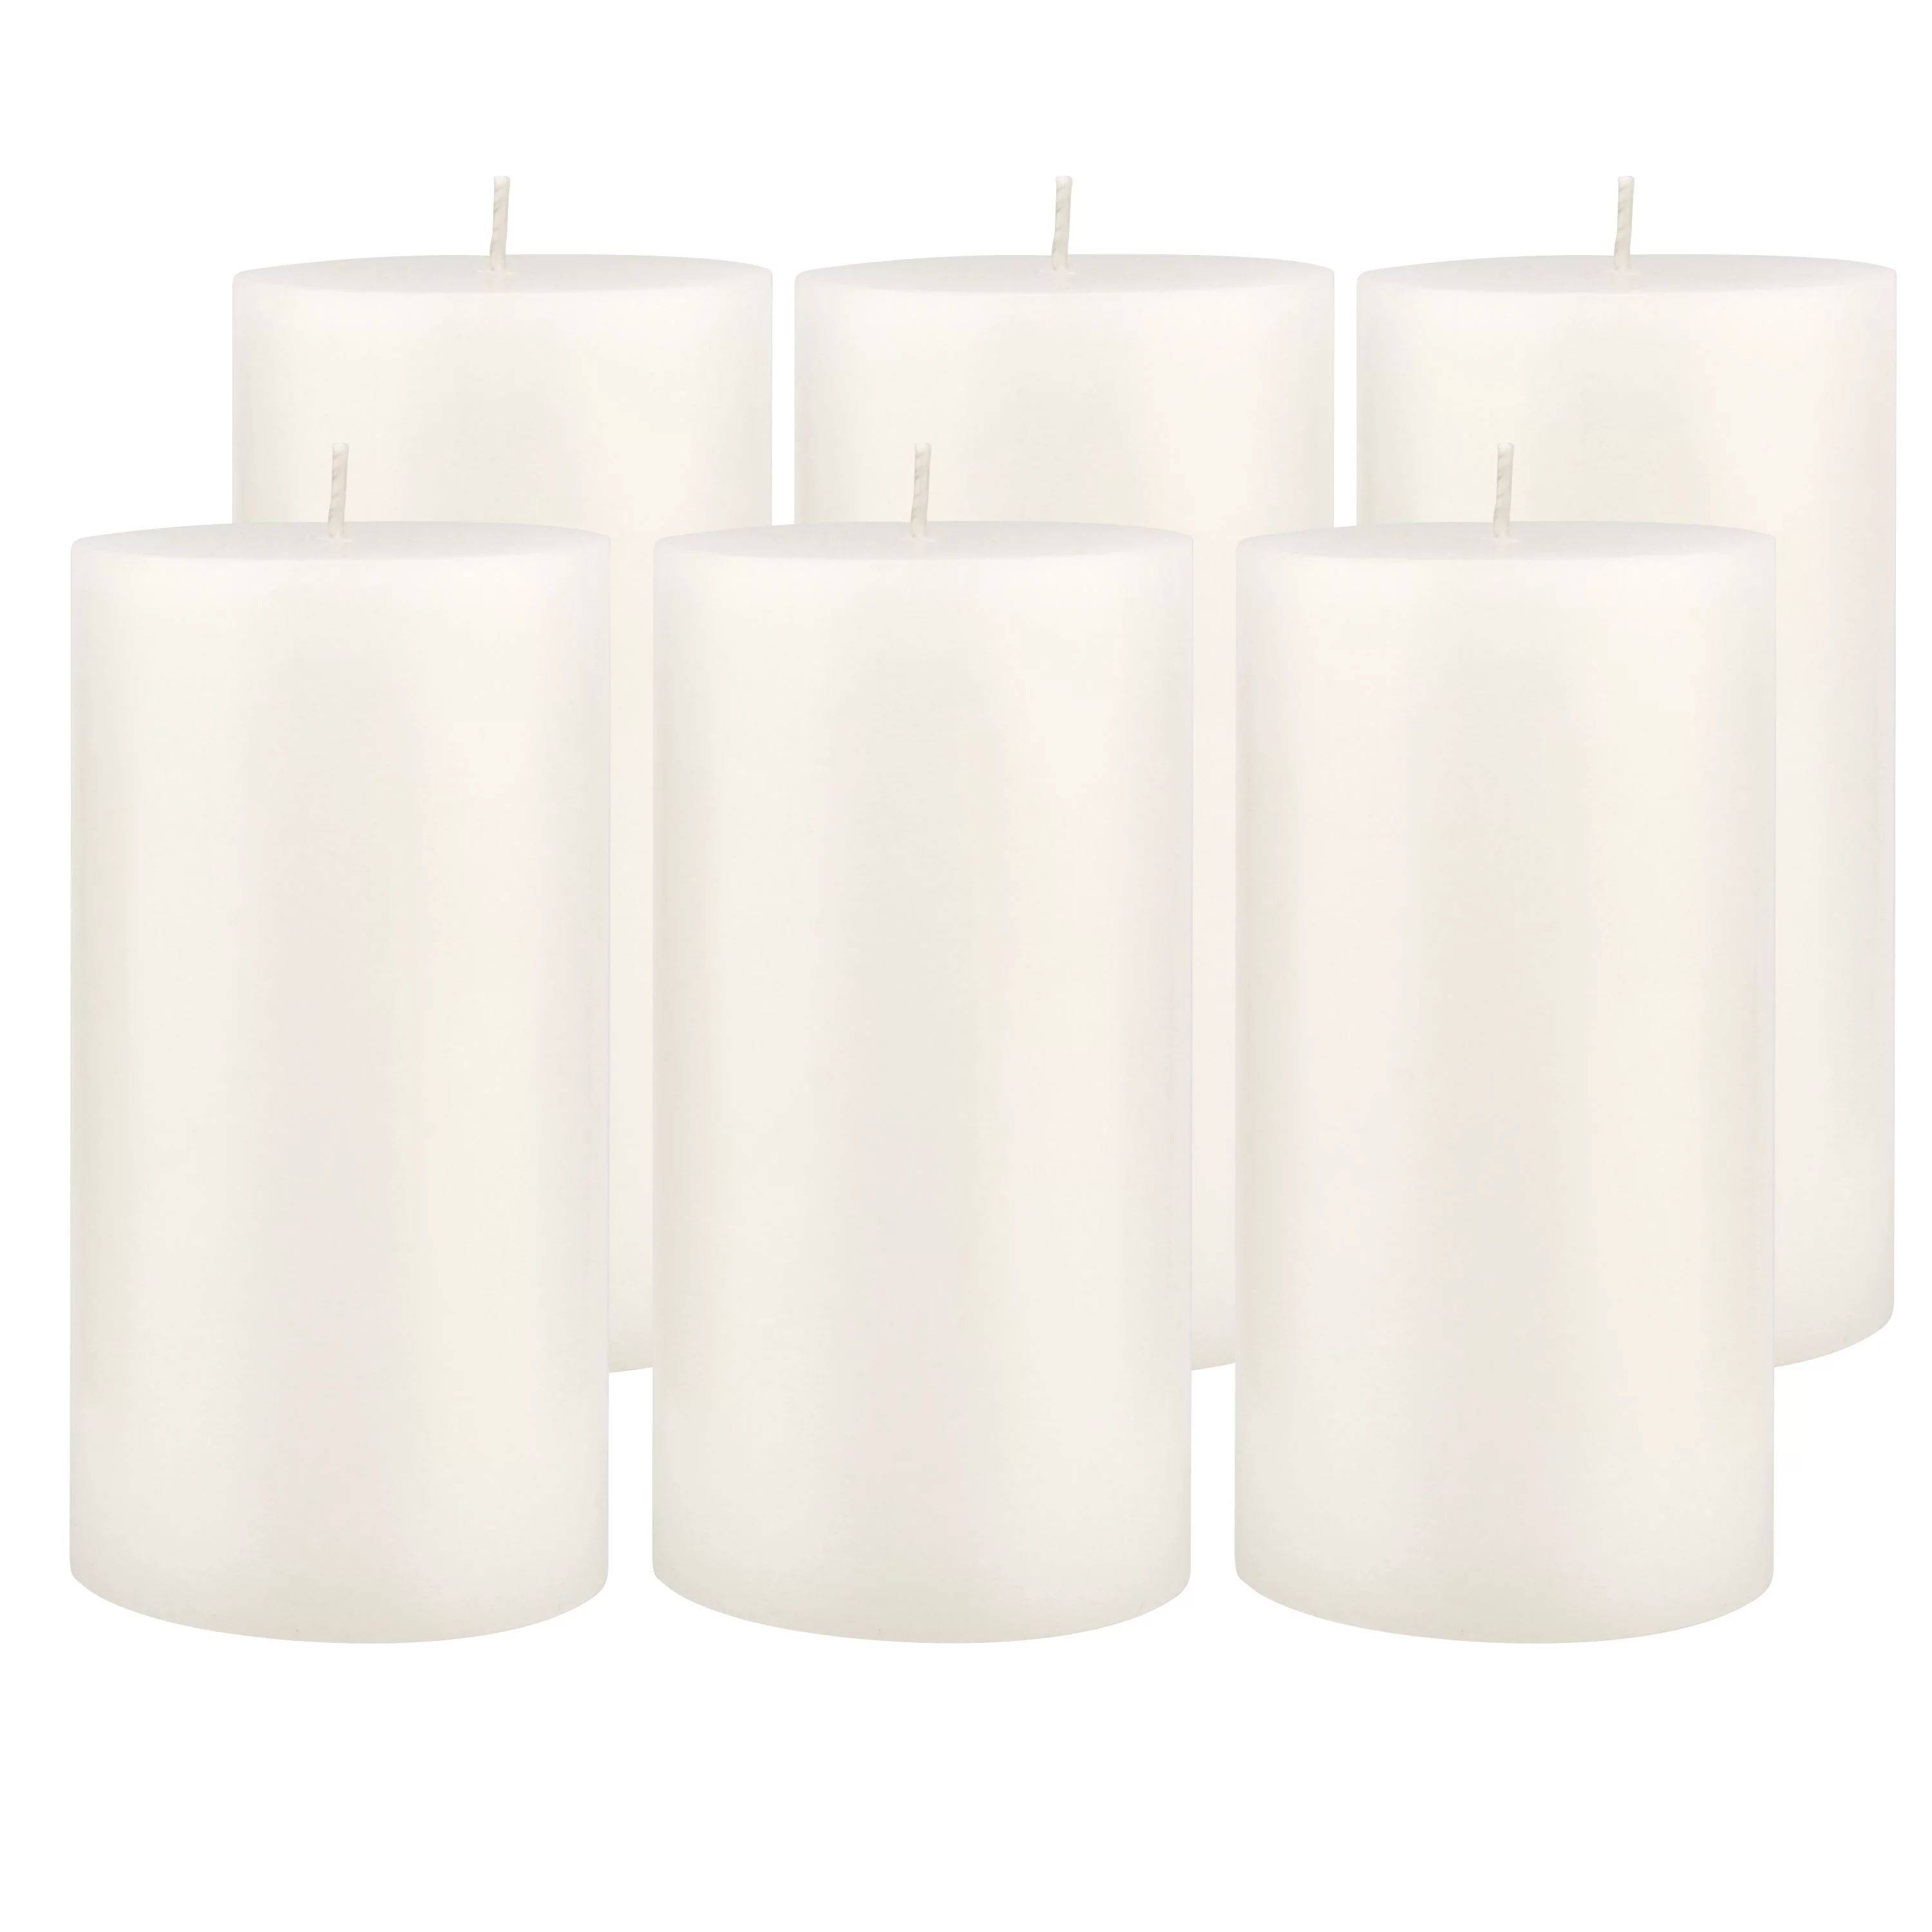 Stonebriar Unscented 3" x 6" 1-Wick White Pillar Candles, 6 Pack | Walmart (US)